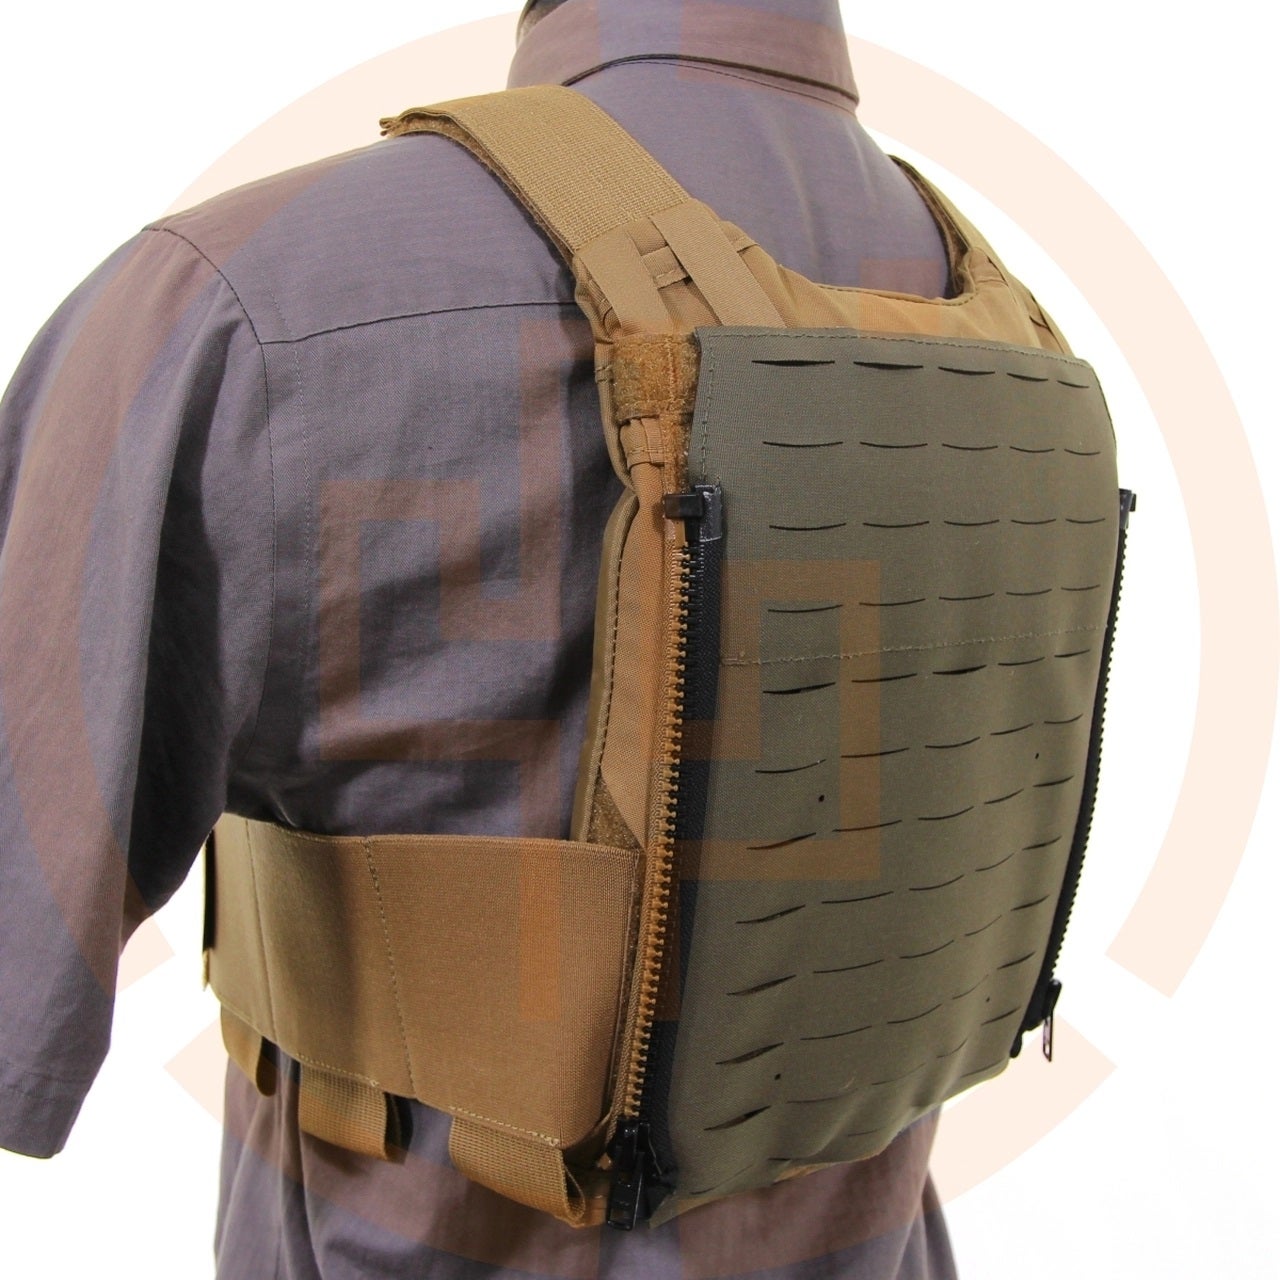 Plate Carrier 24 From Whiskey Two Four Now Available and Shipping